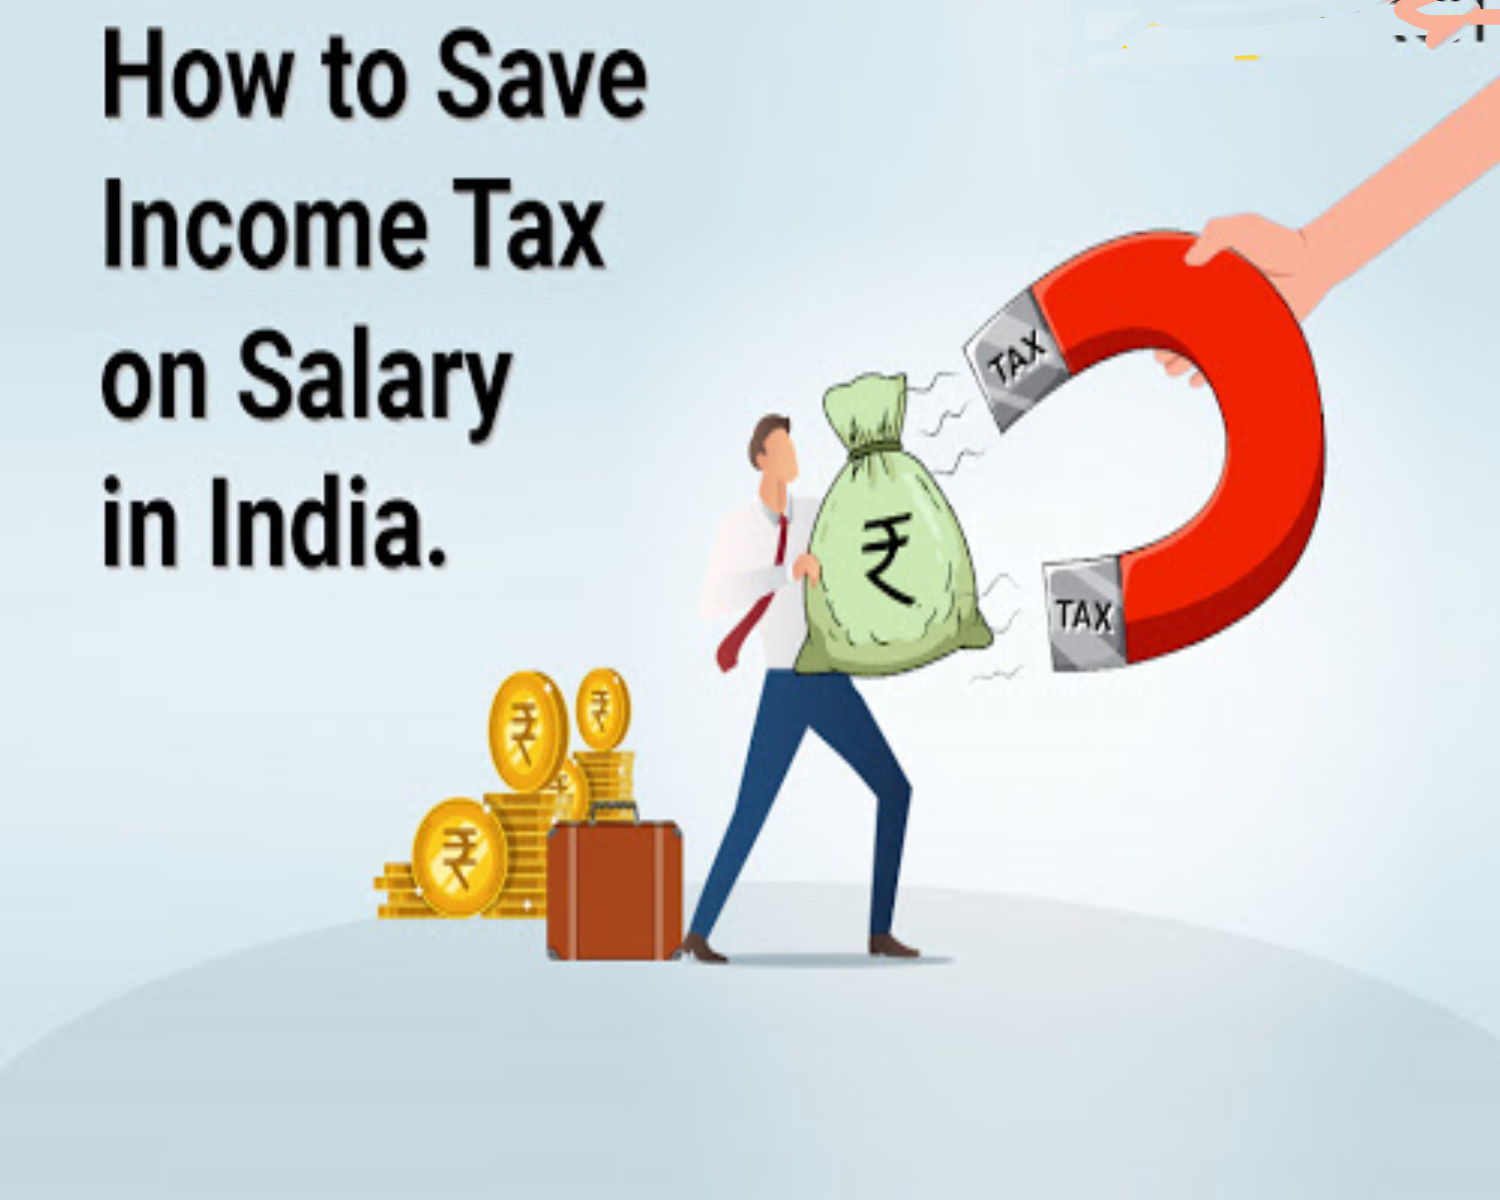 Allowances, Exemptions & Deductions under Income Tax Act for Salaried Individuals